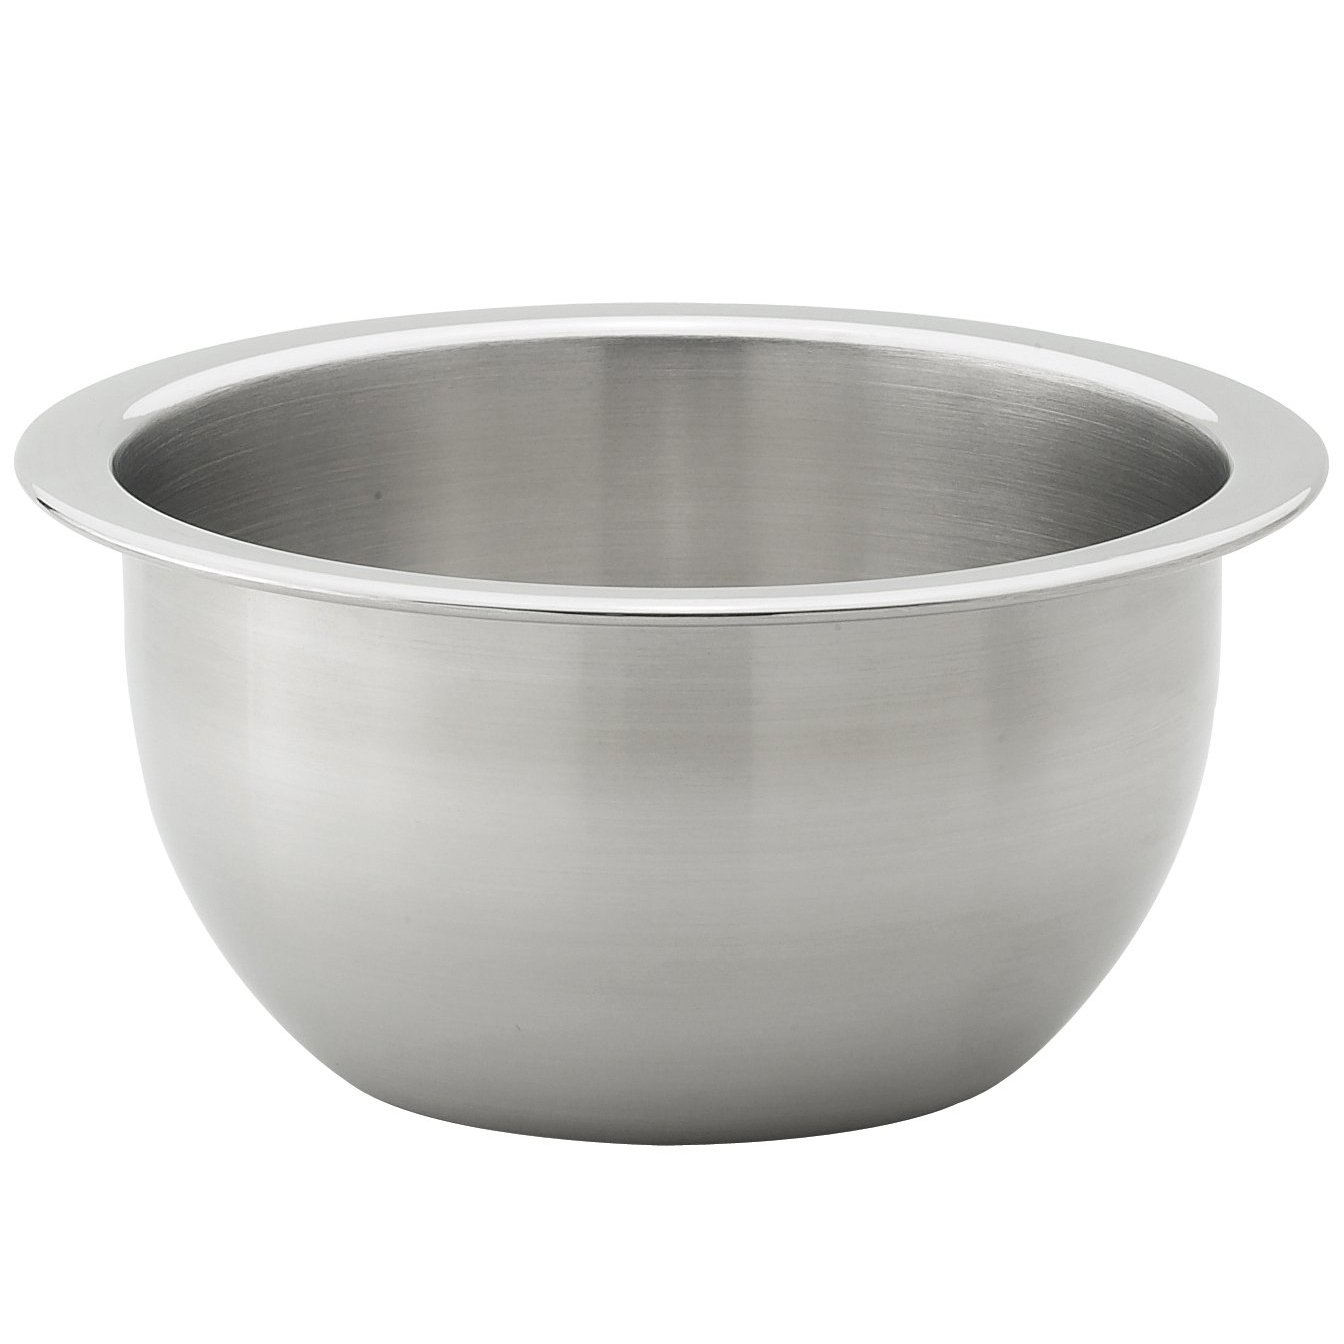 The Essentials 48001 Mixing Bowl, Stainless Steel, 2 Quarts